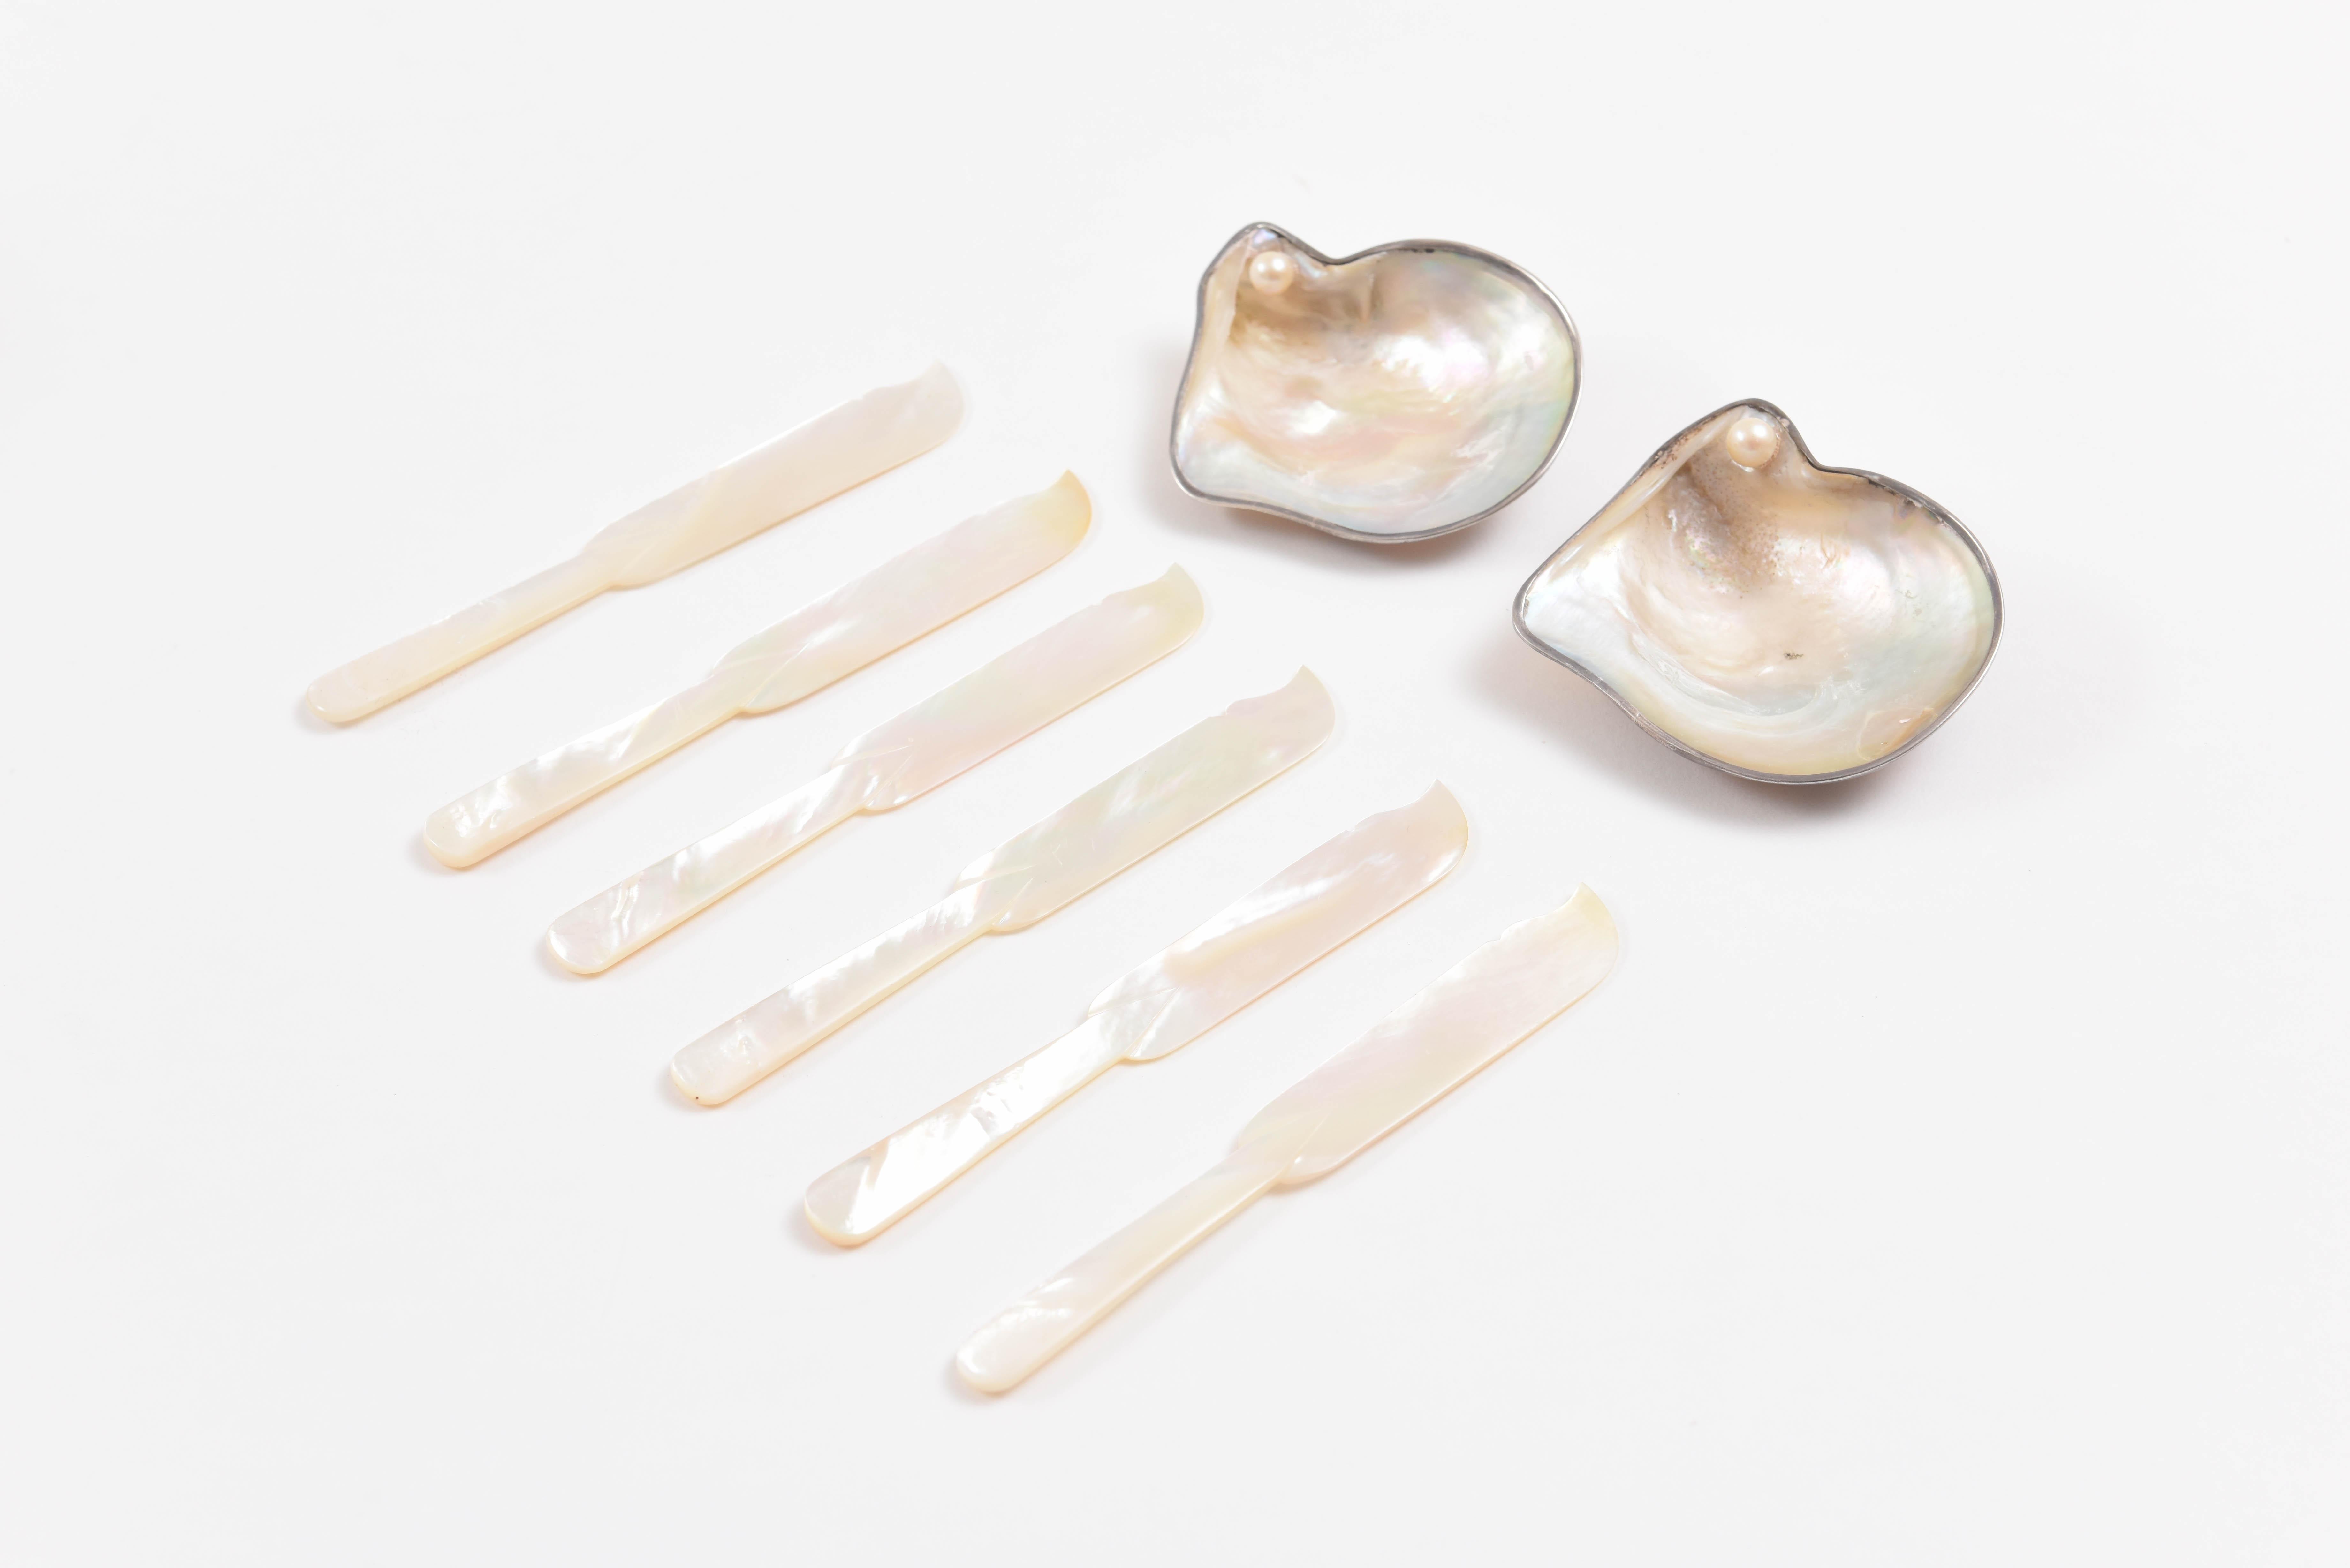 Early 20th Century Caviar Set, Mother-of-Pearl with Six Spreaders & Two Shells Trimmed in Sterling